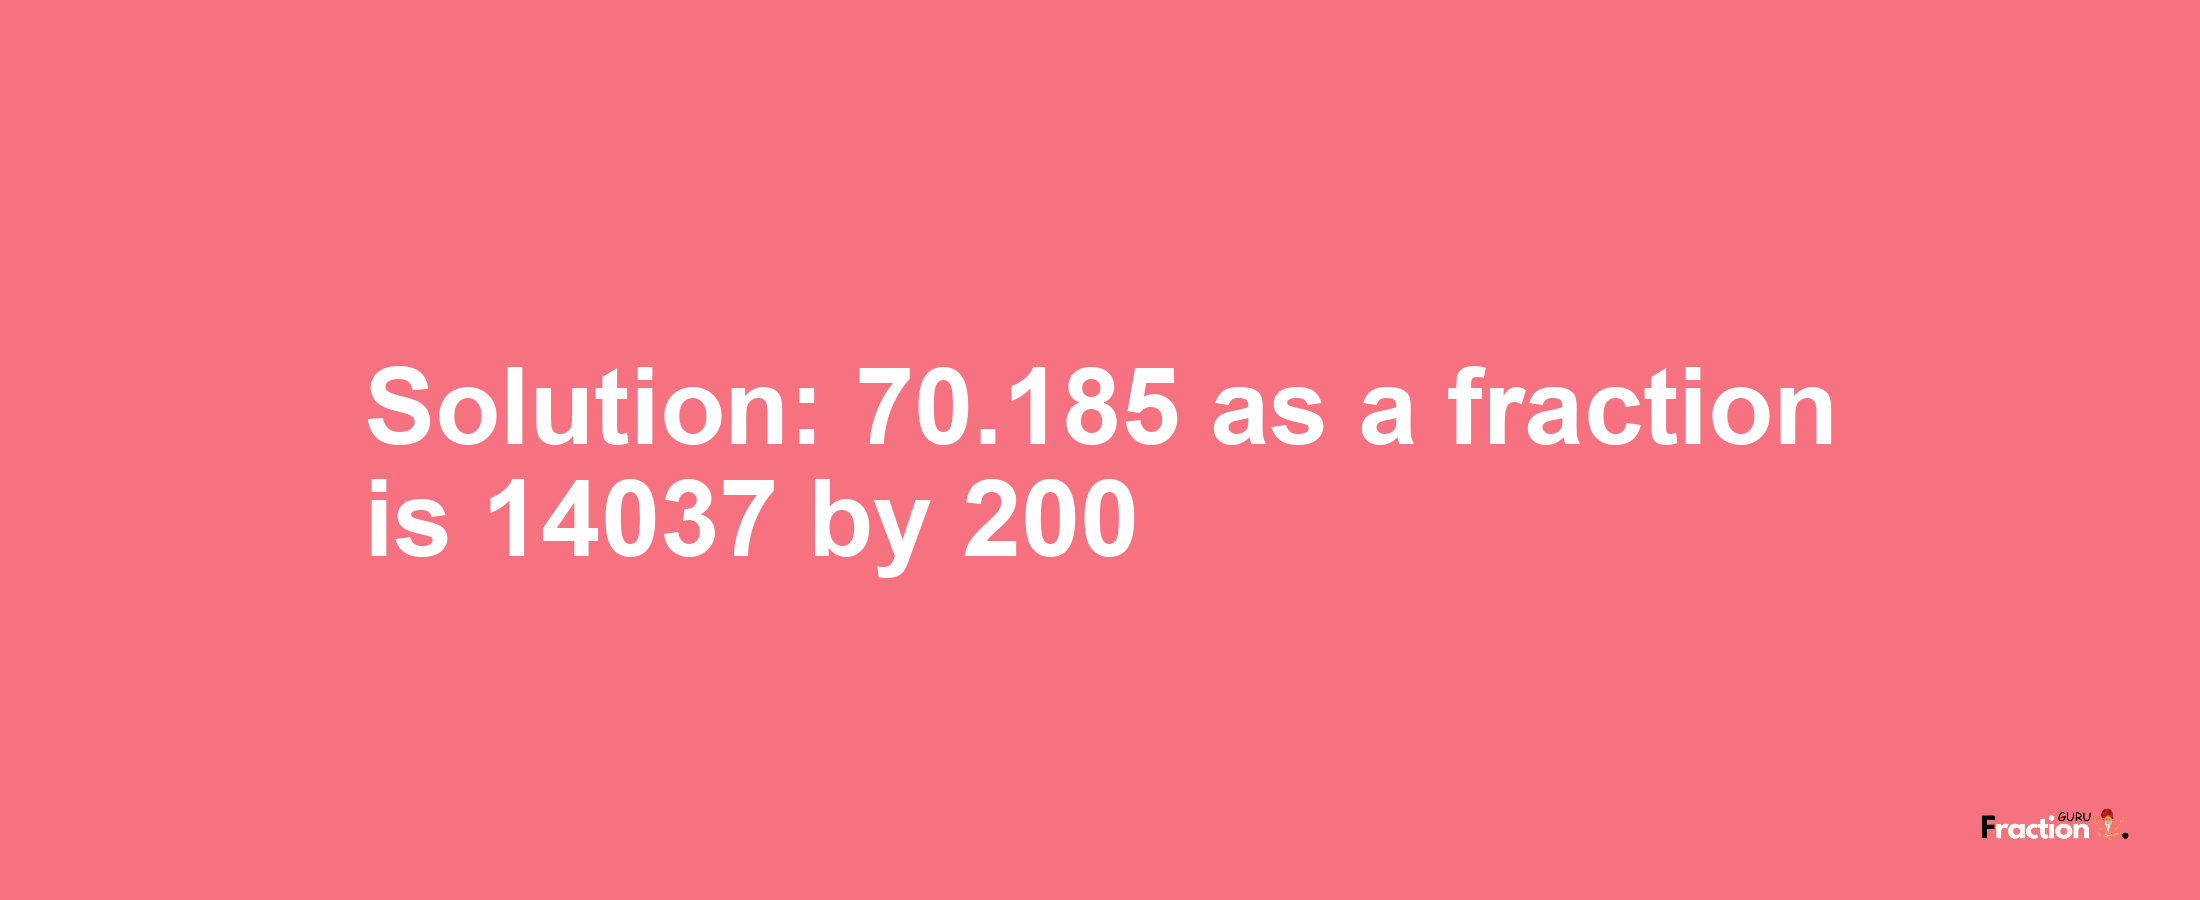 Solution:70.185 as a fraction is 14037/200